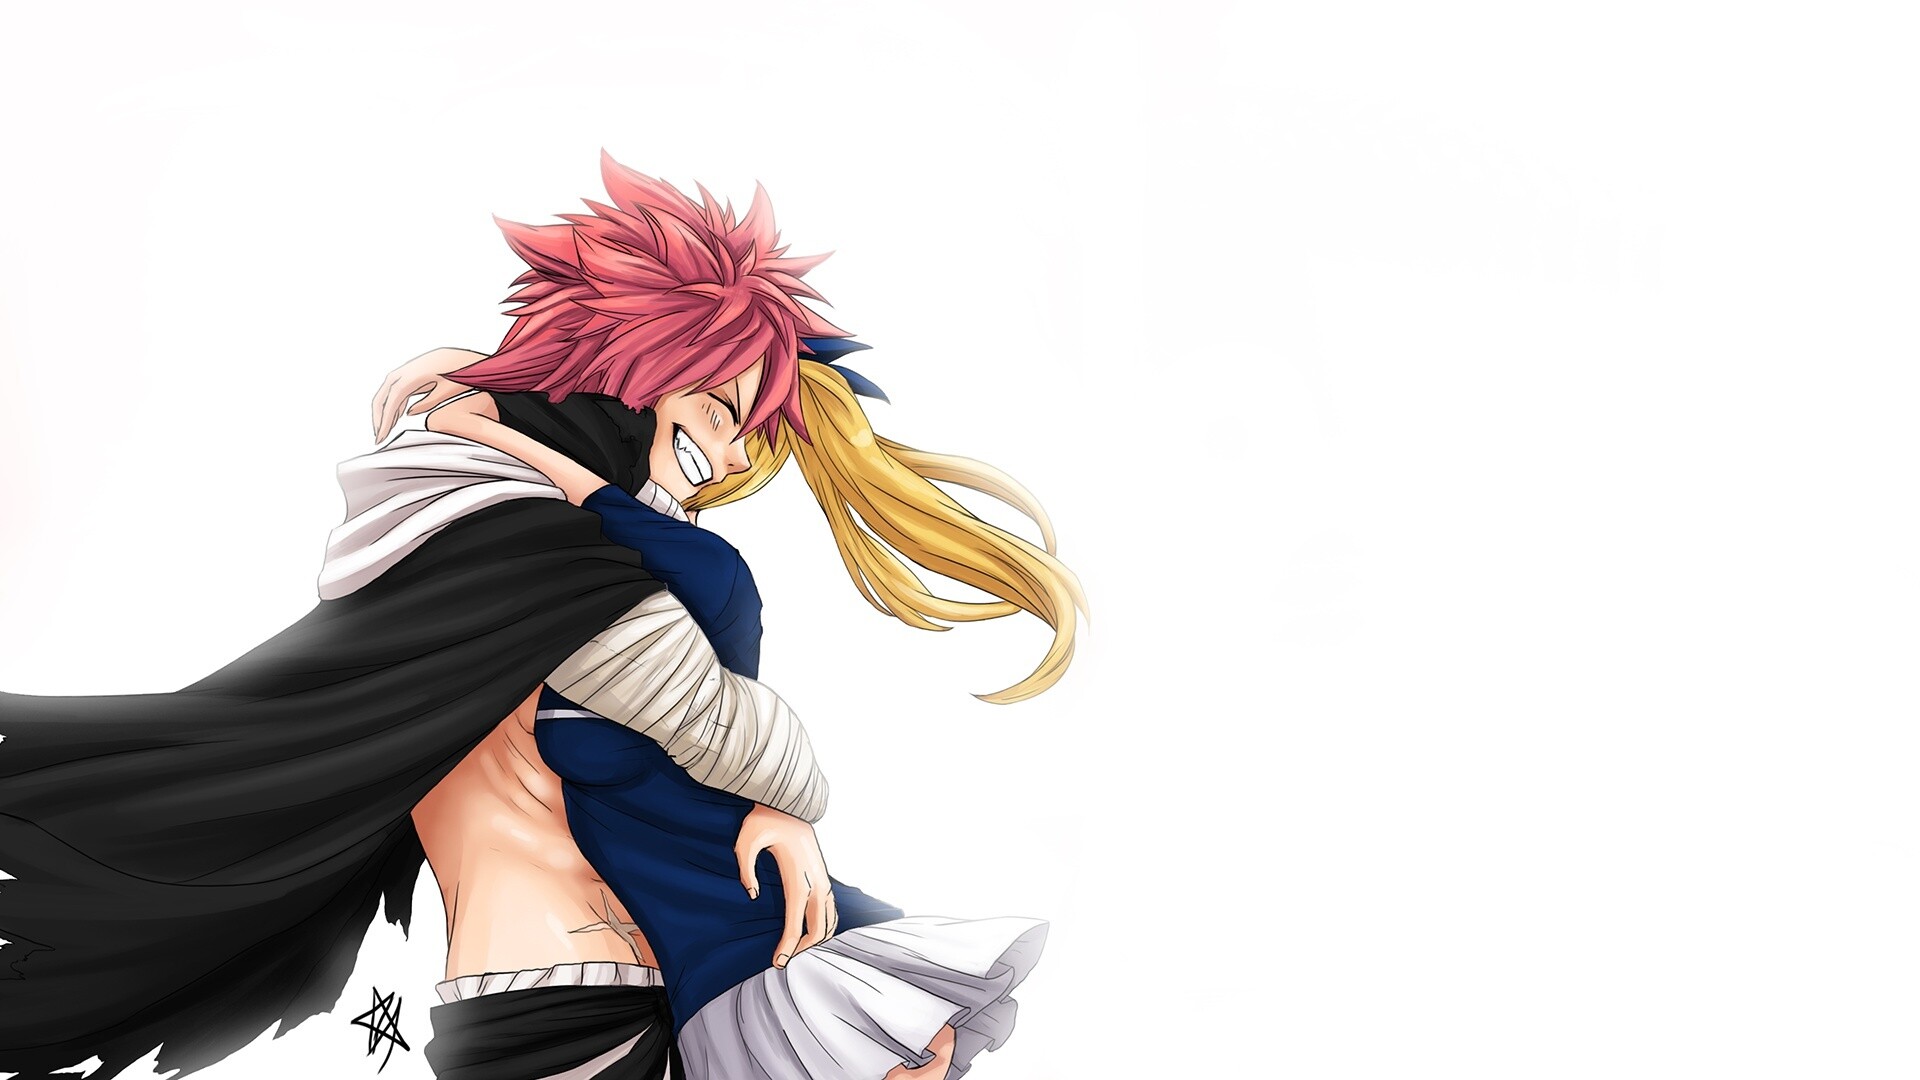 Fairy Tail: Natsu and Lucy, An anime adaptation co-produced by A-1 Pictures and Satelight. 1920x1080 Full HD Background.